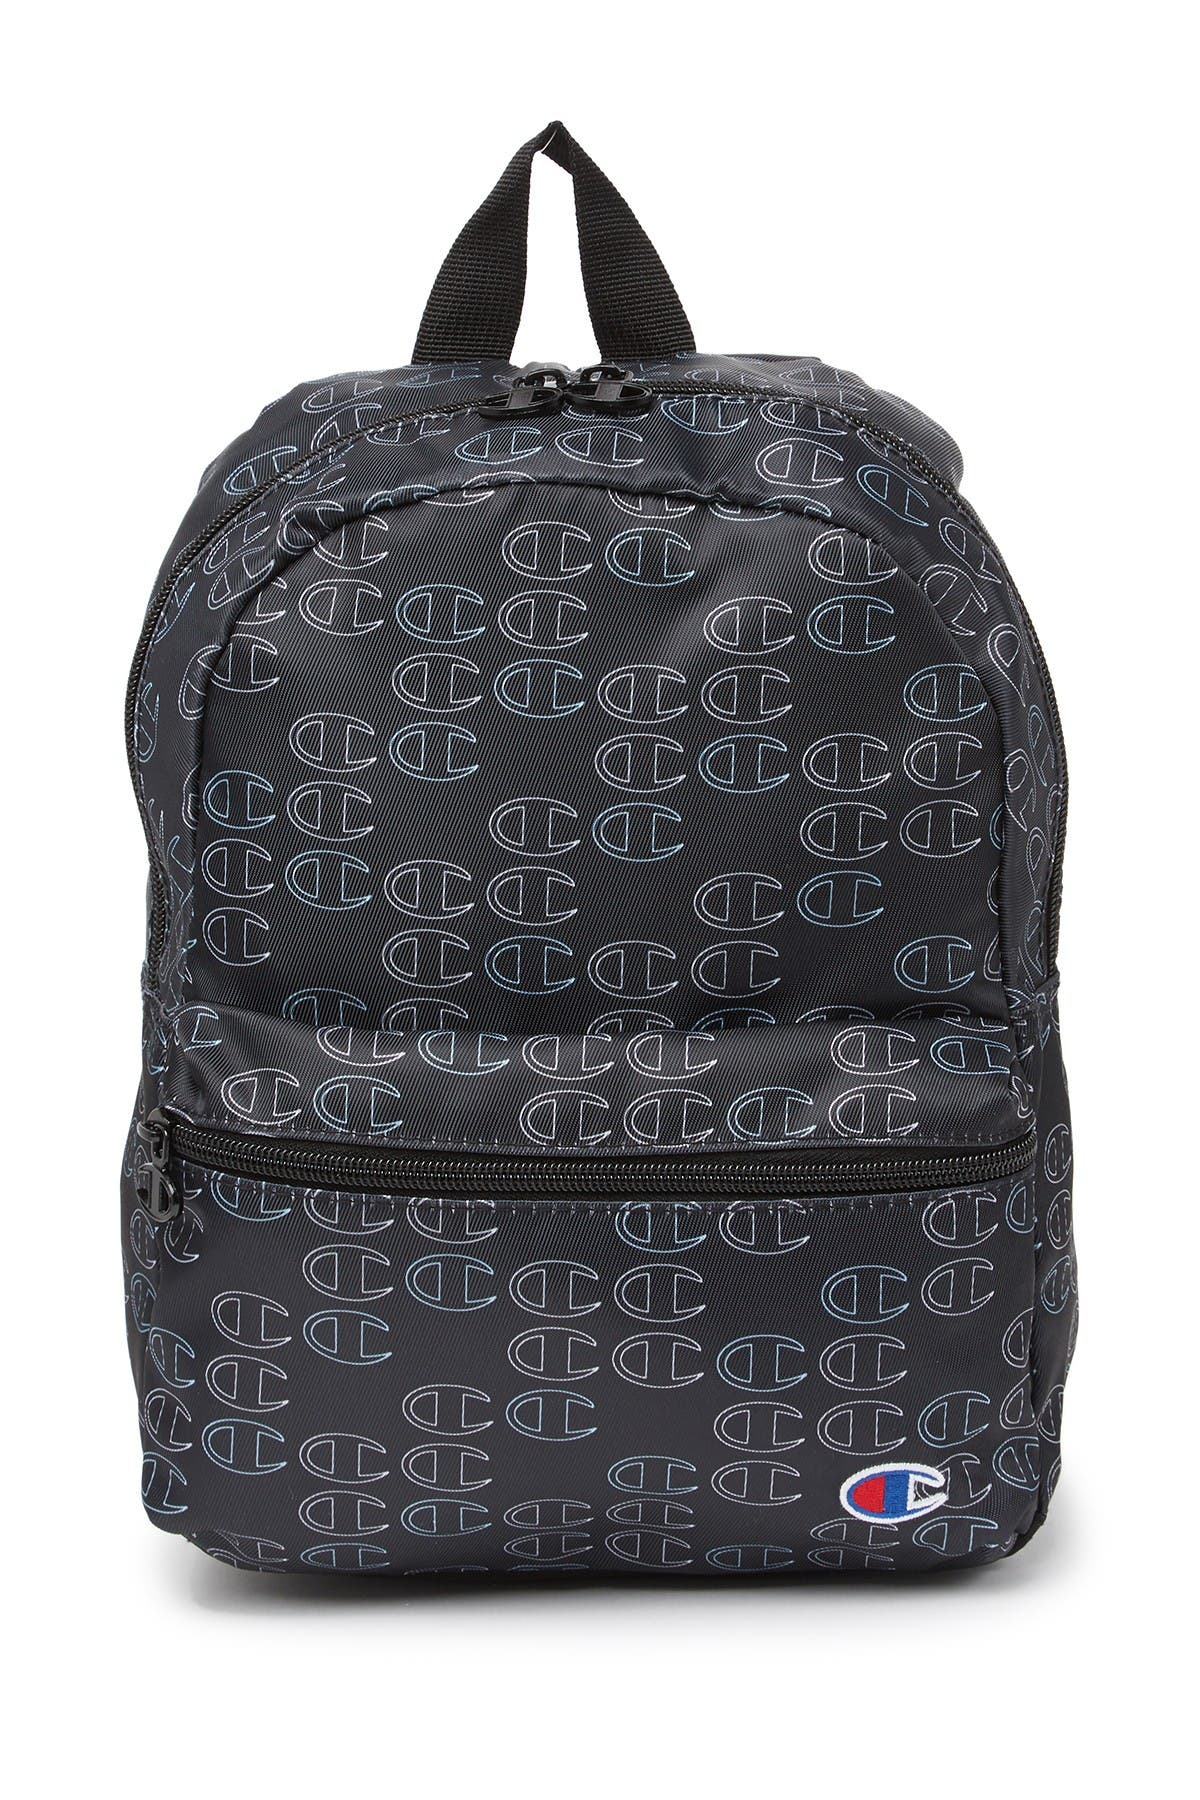 champion backpack womens silver